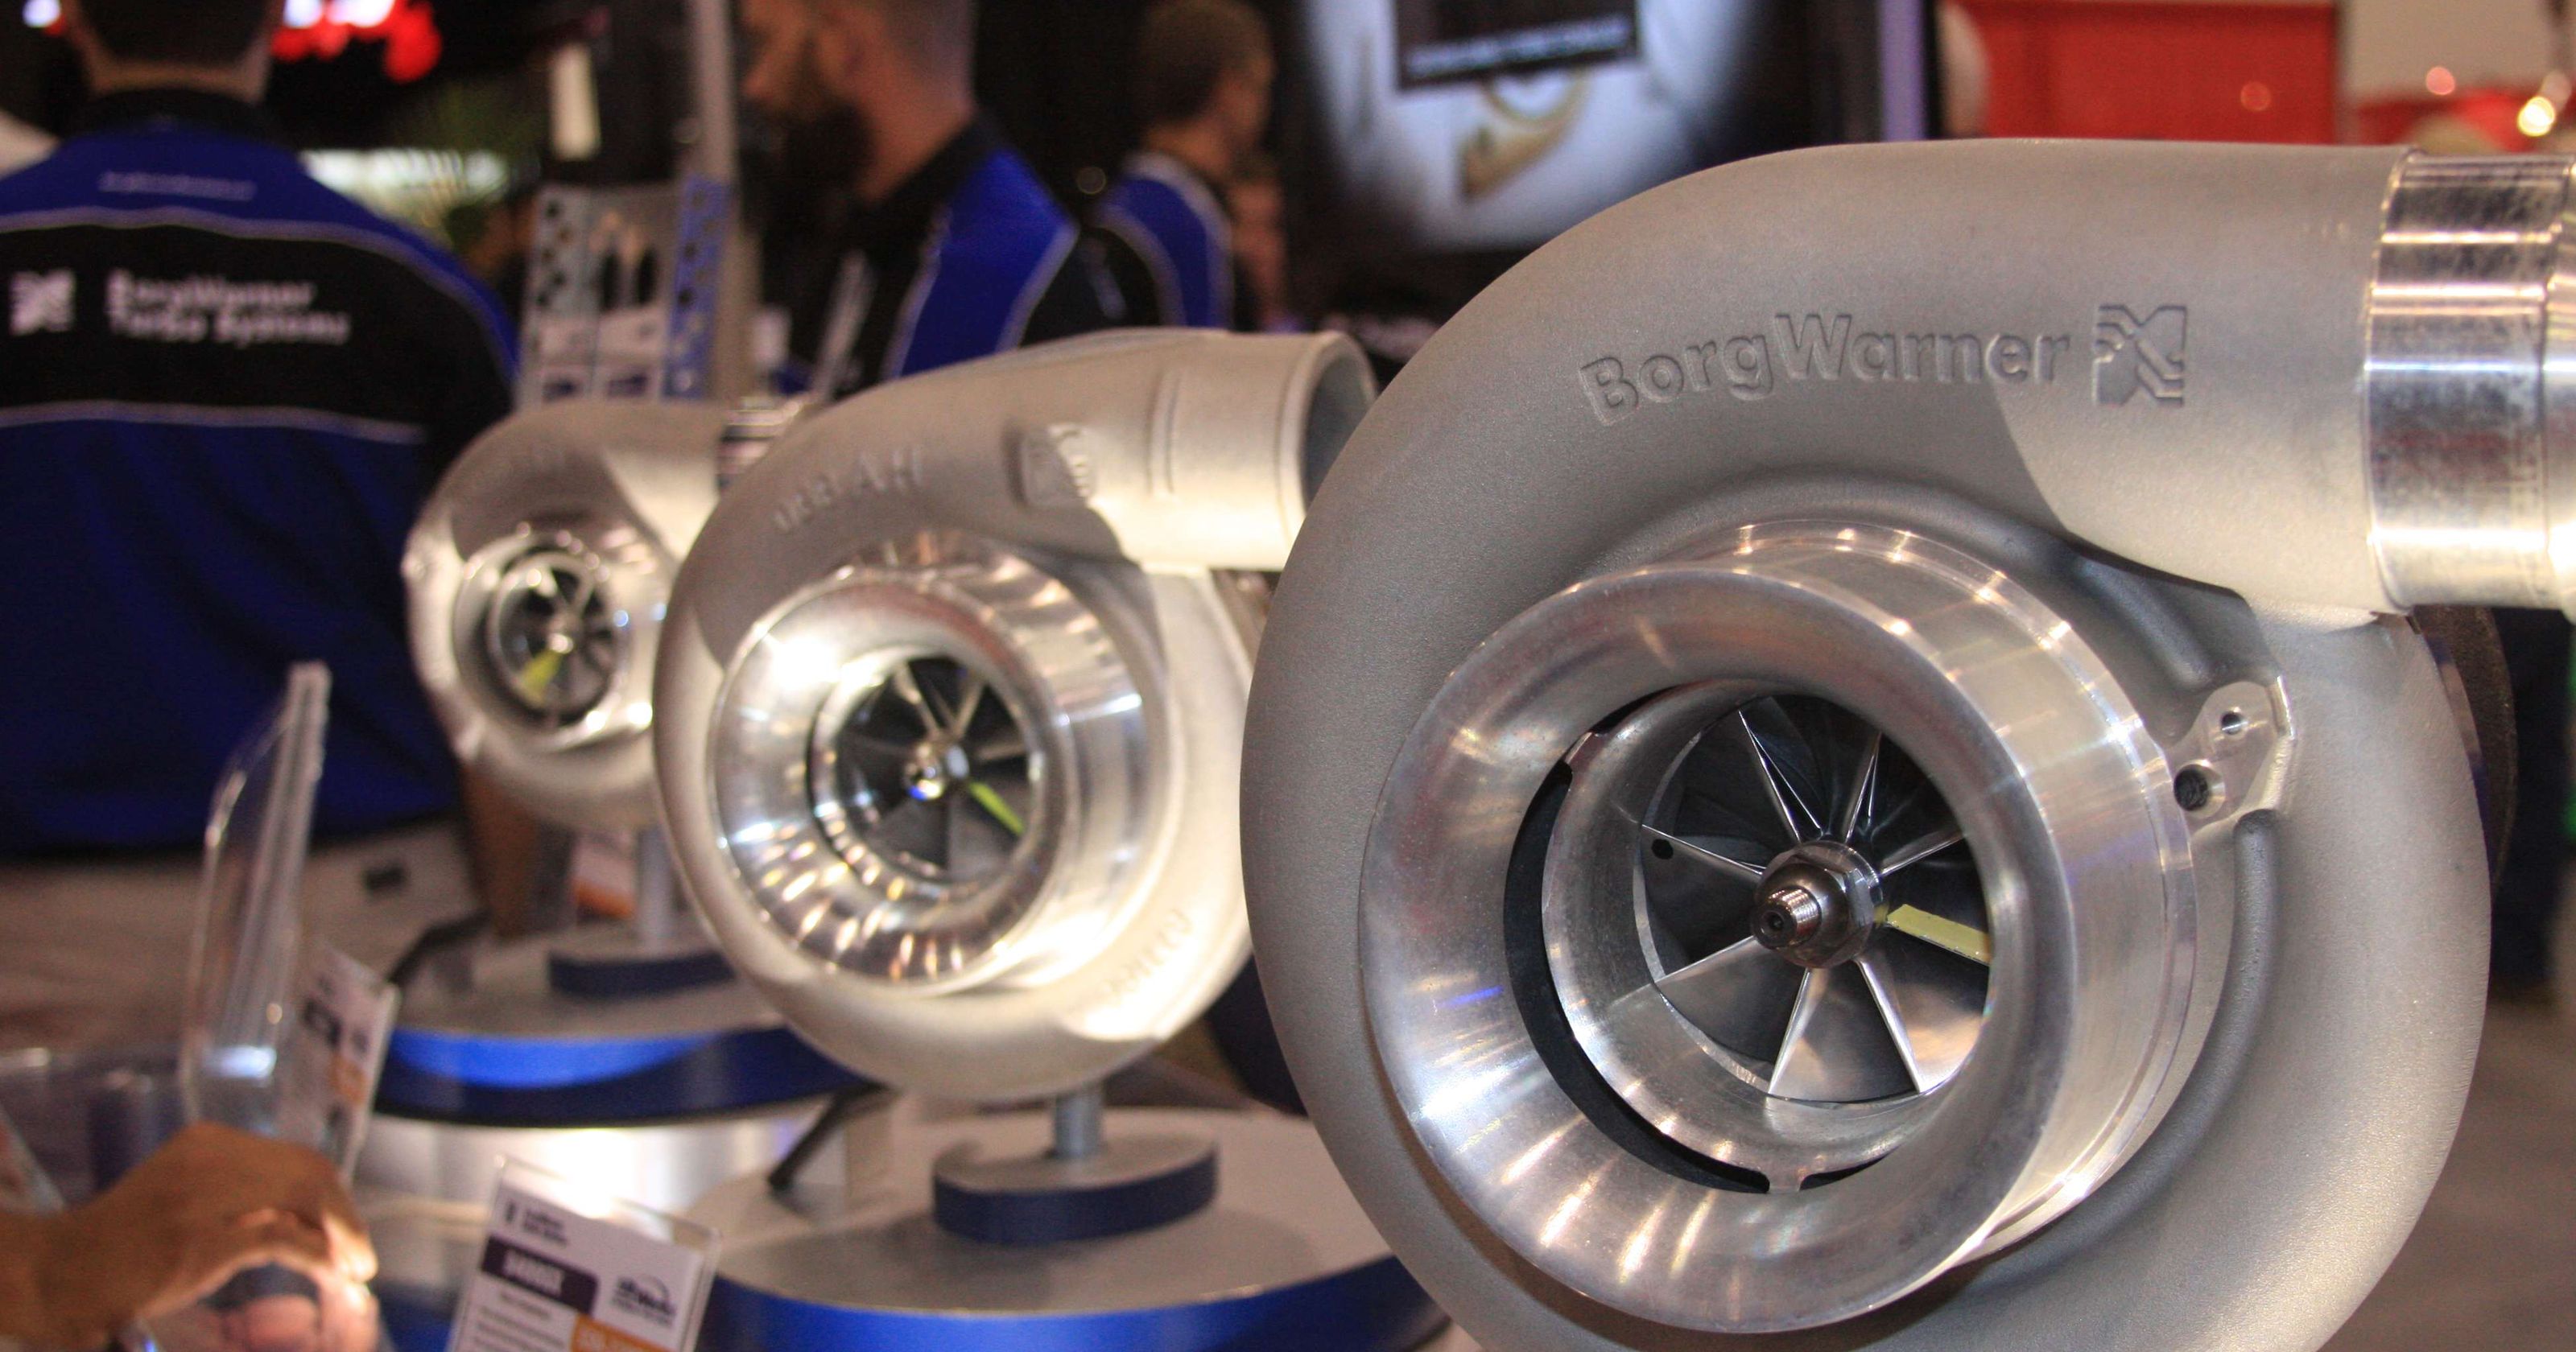 BorgWarner’s facility in Arden, N.C., is providing a new line of turbochargers for GM and will be adding 60 jobs for its third-shift positions.